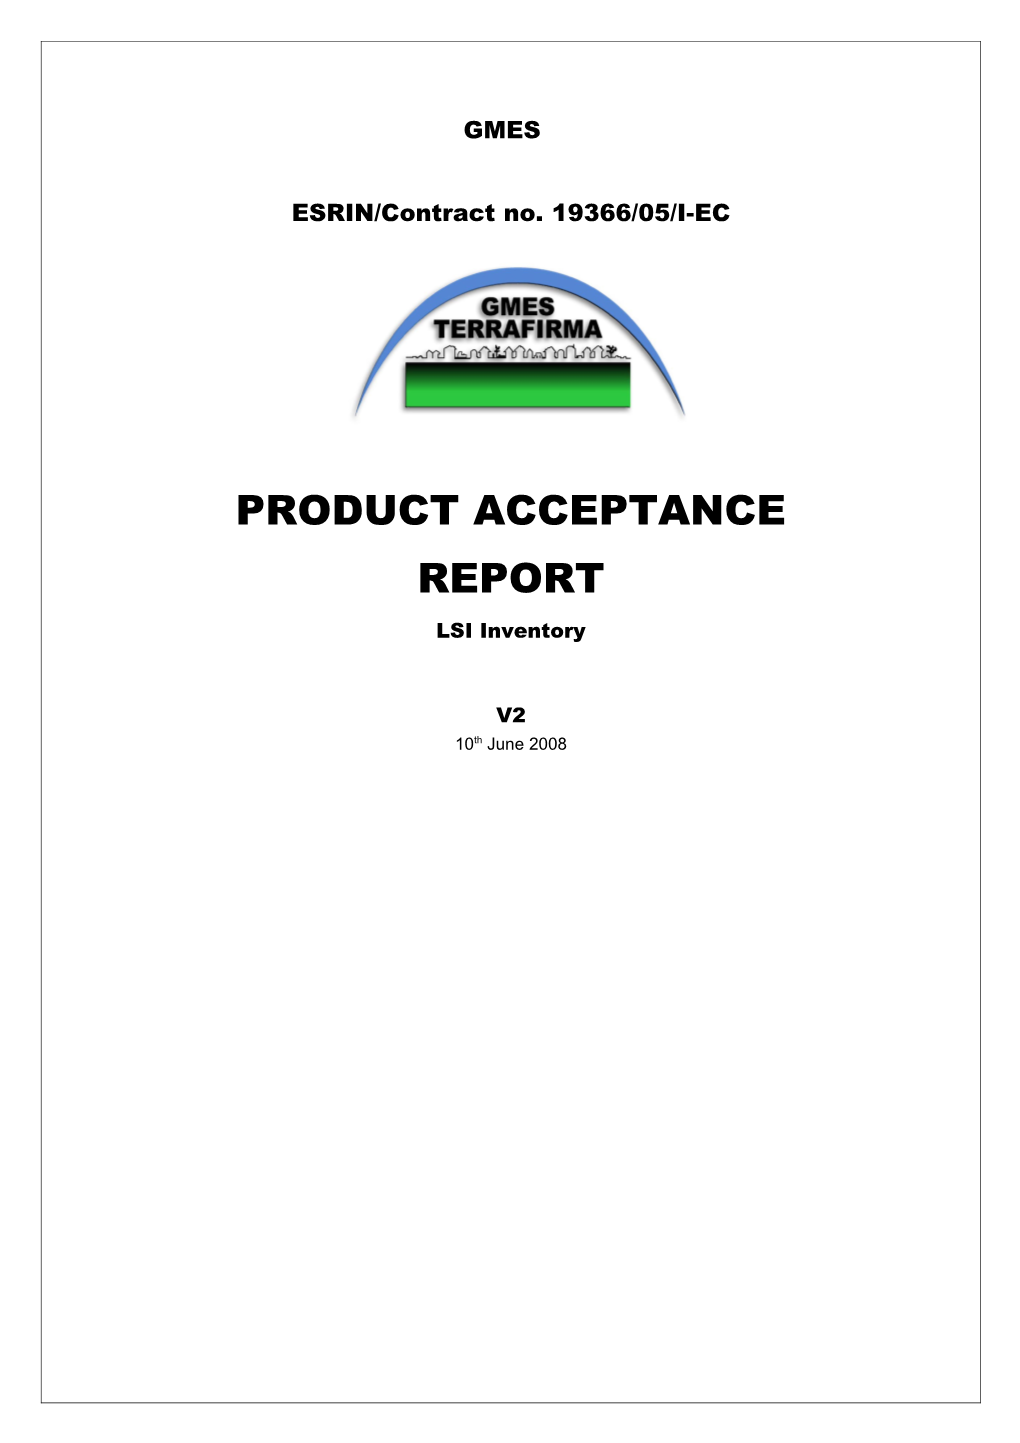 Terrafirma - Product Acceptance Report Template